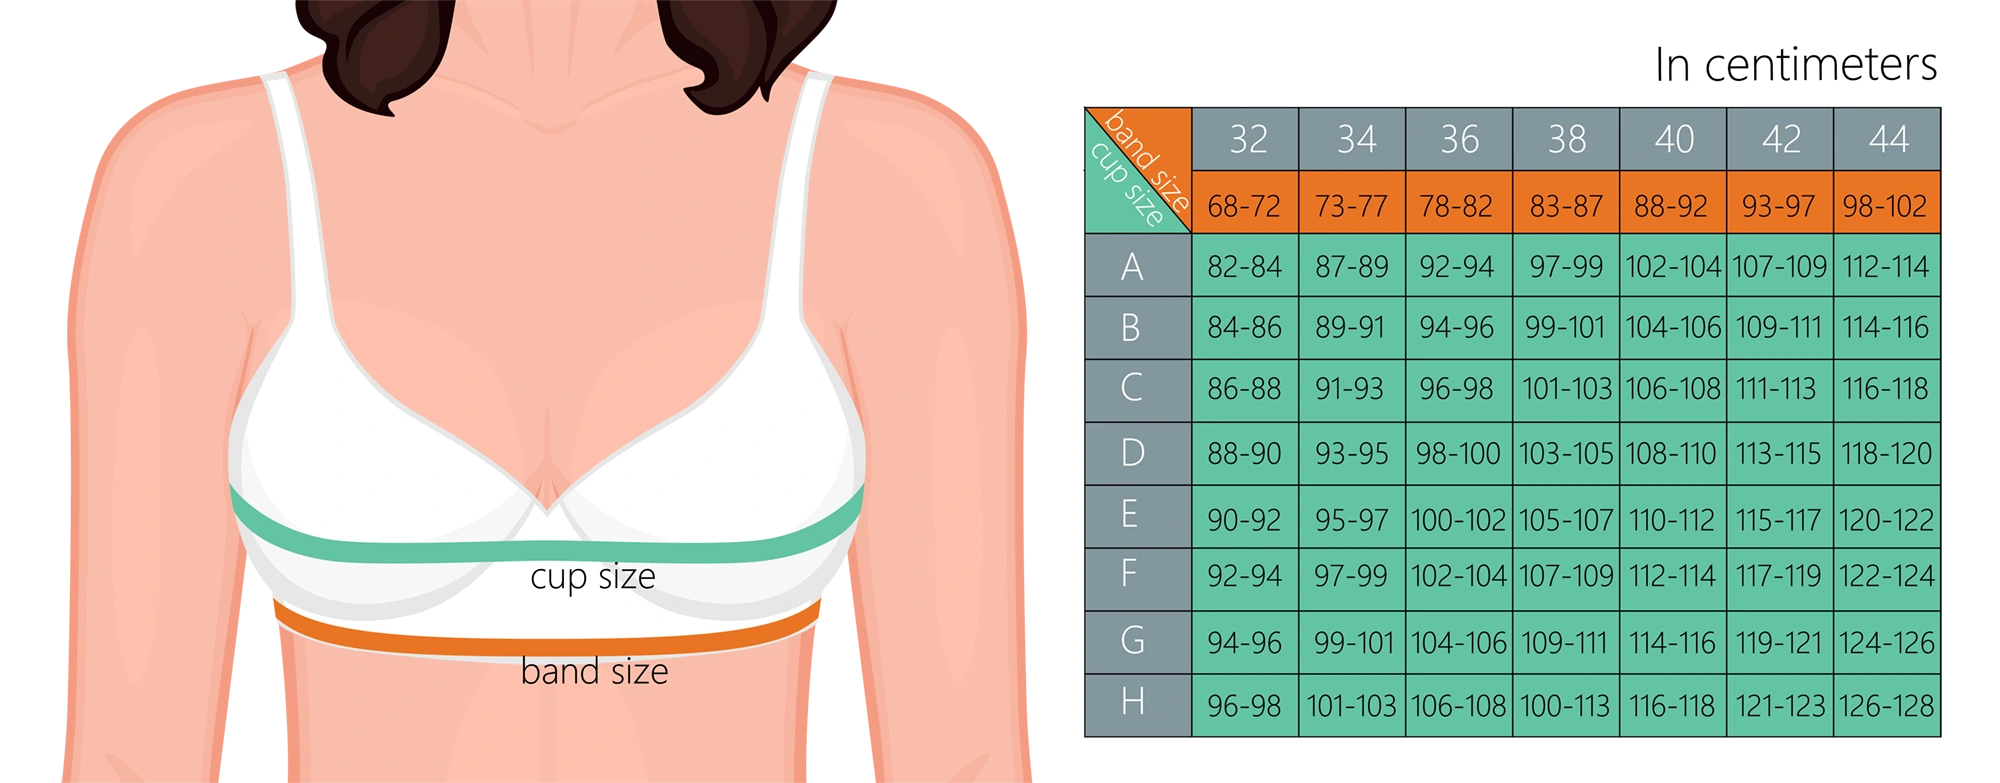 How to measure for a bra, bra cup size and band size measurements.